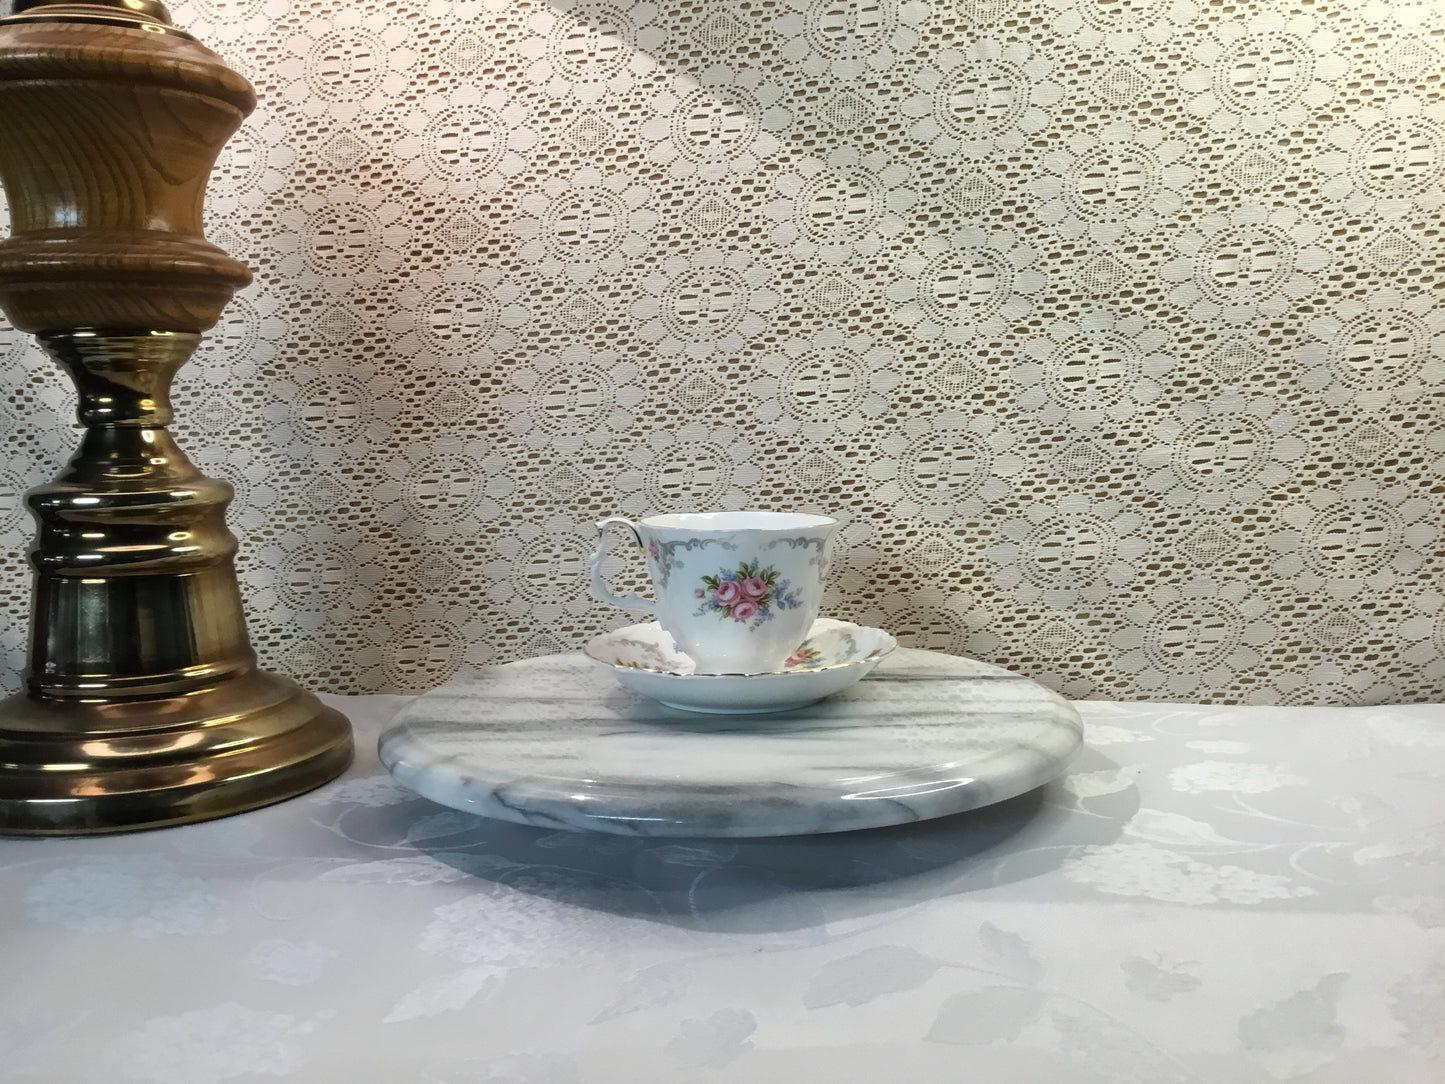 Royal Albert "Tranquility" Cup and Saucer